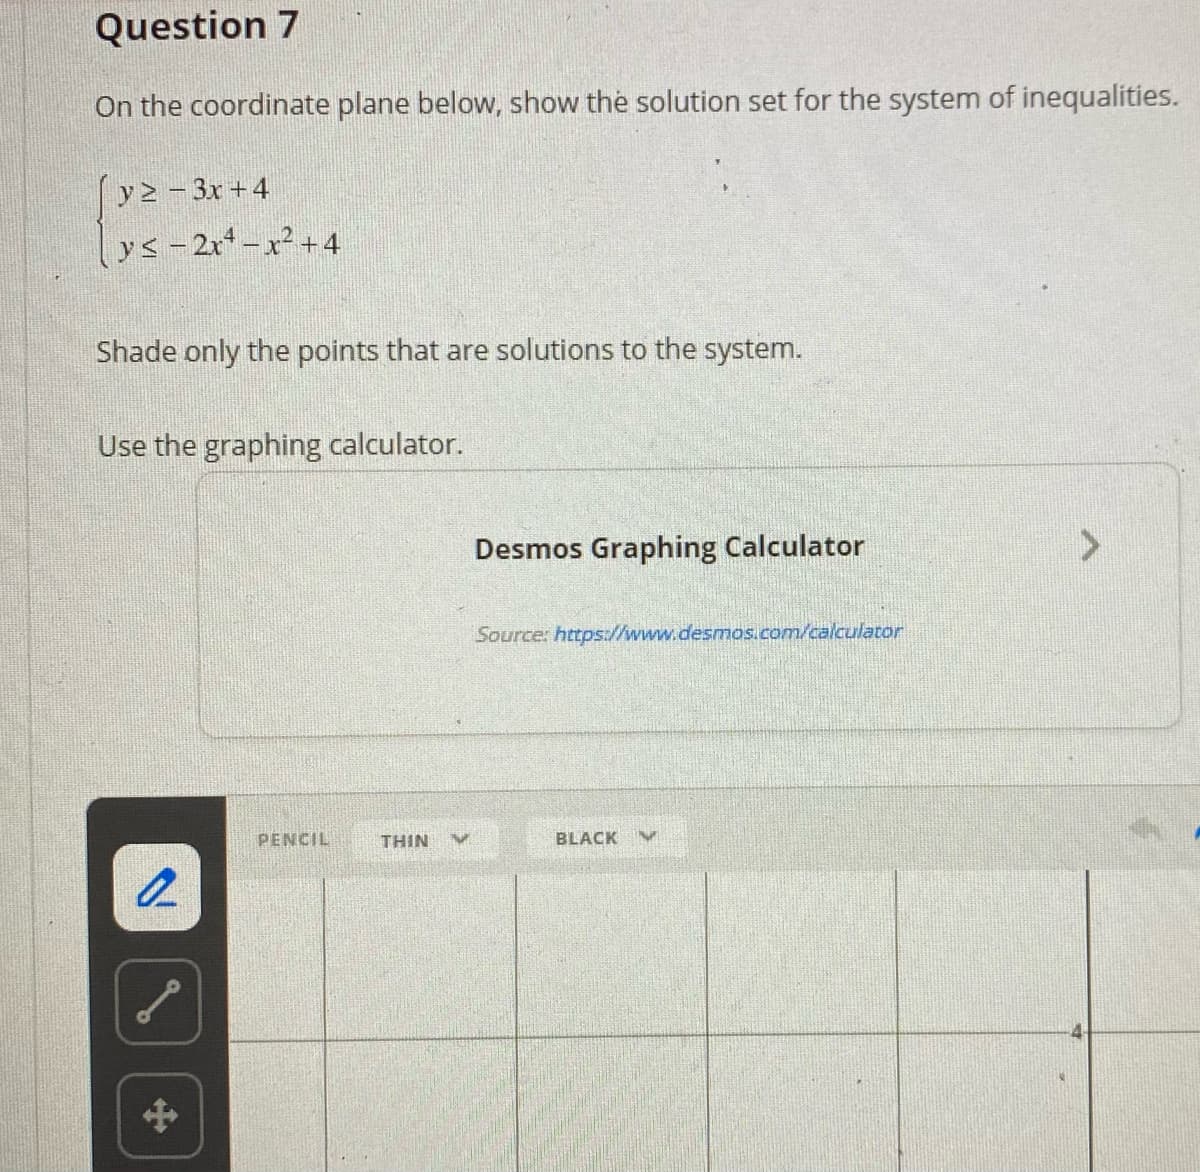 Question 7
On the coordinate plane below, show the solution set for the system of inequalities.
y2 - 3x +4
ys -2r-x +4
Shade only the points that are solutions to the system.
Use the graphing calculator.
Desmos Graphing Calculator
<>
Source: https://www.desmos.com/calculator
PENCIL
THIN
BLACK
中
